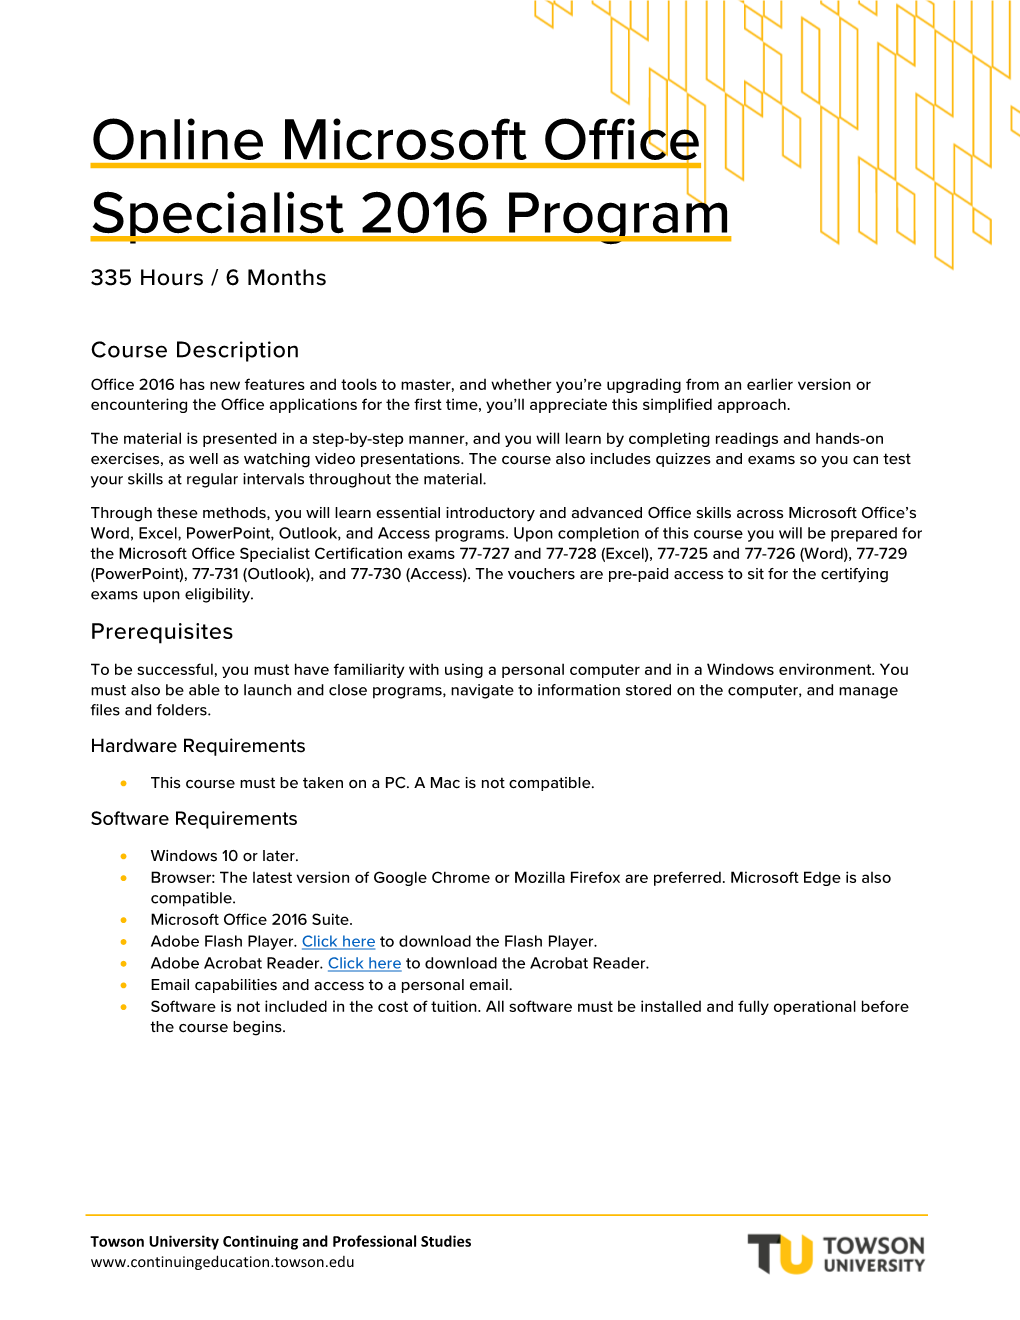 Microsoft Office Specialist 2016 Online Outline